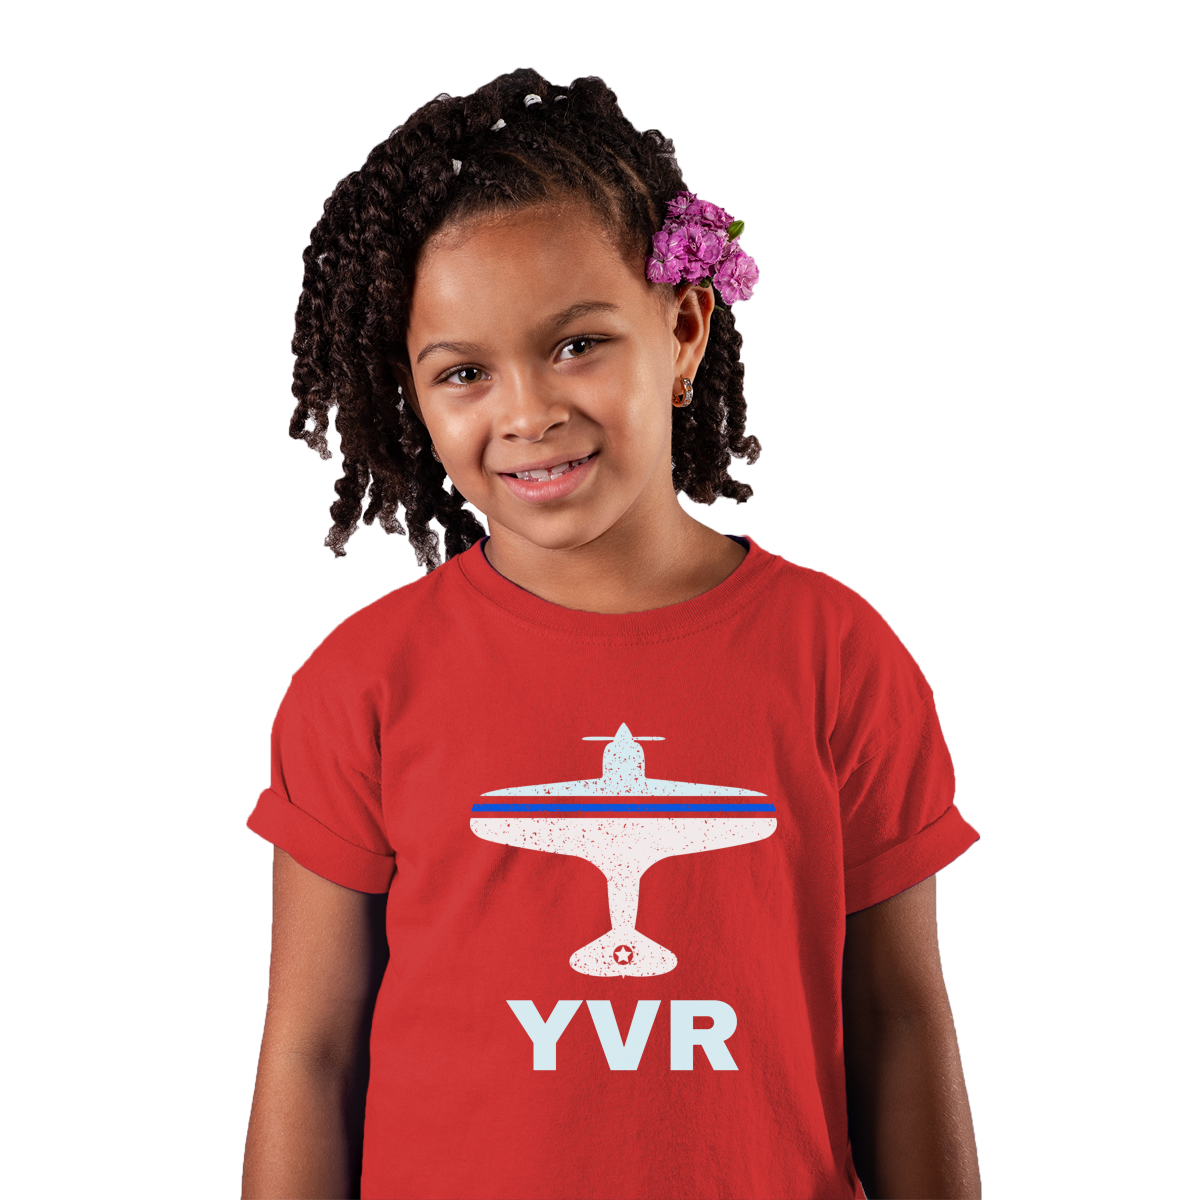 Fly Vancouver YVR Airport Kids T-shirt | Red